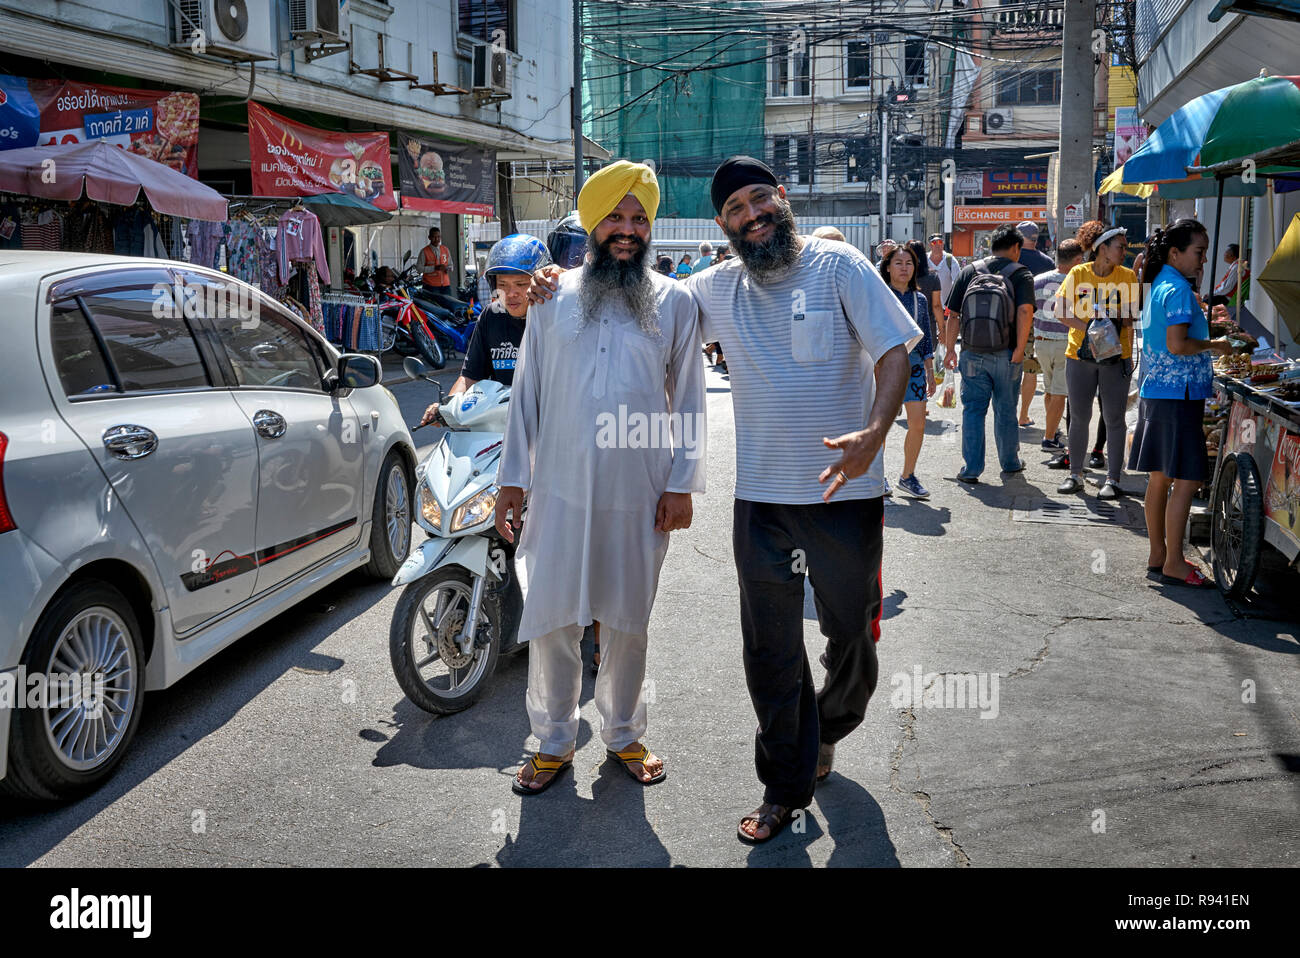 Indian Sikh traditional Kurta pajama shirt and turban head wear against his western attired counterpart - modern versus traditional Stock Photo